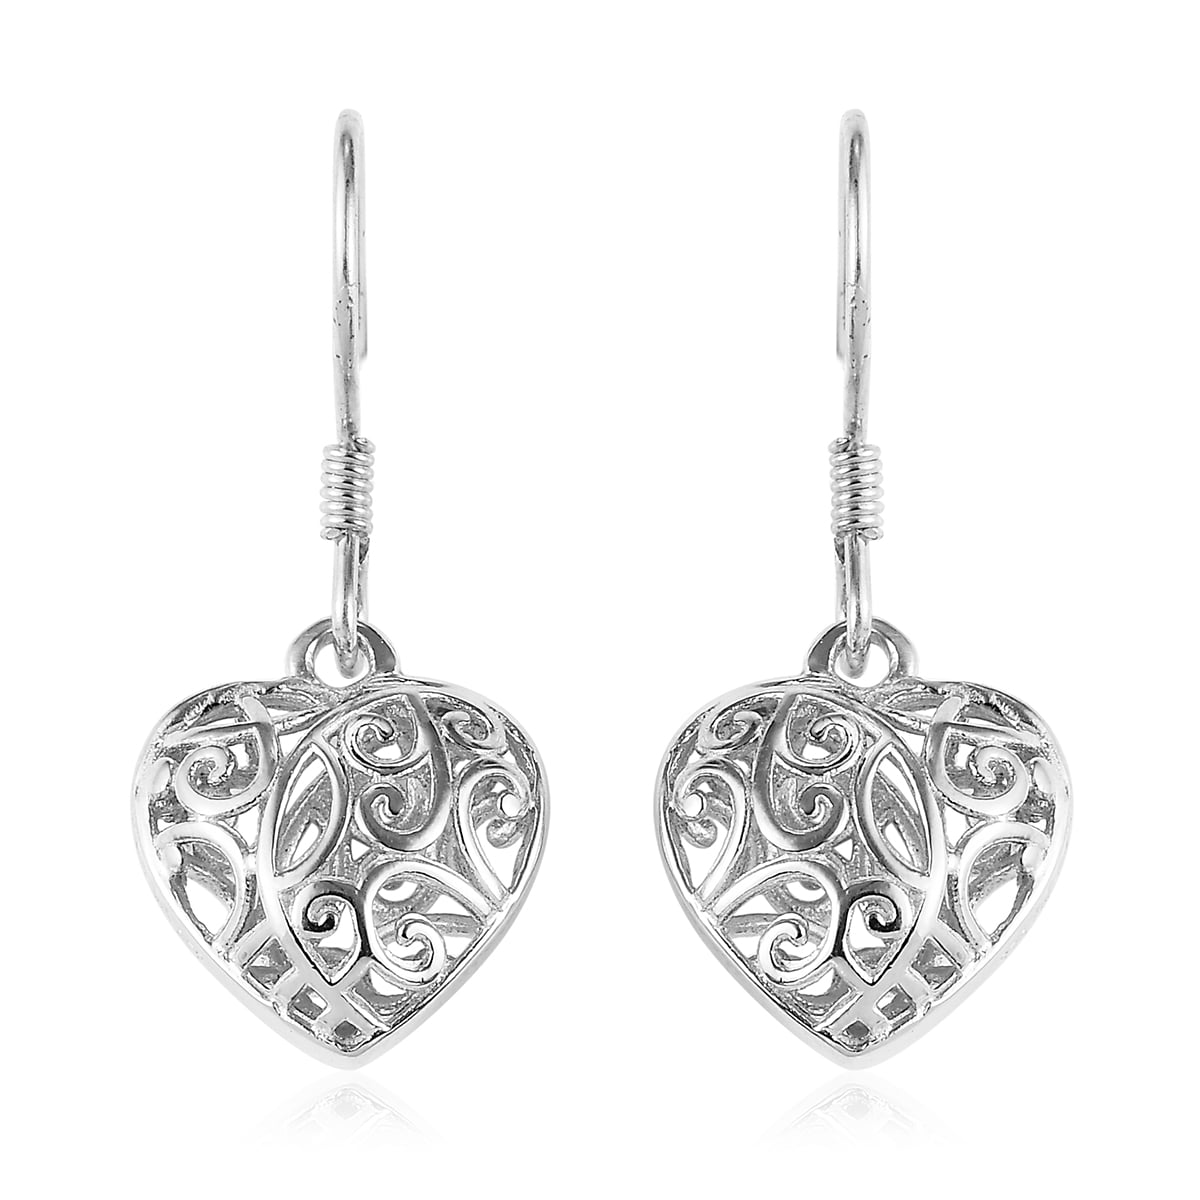 Mireval Sterling Silver Anti-Tarnish Treated Plain Heart Locket approximately 27 x 21 mm